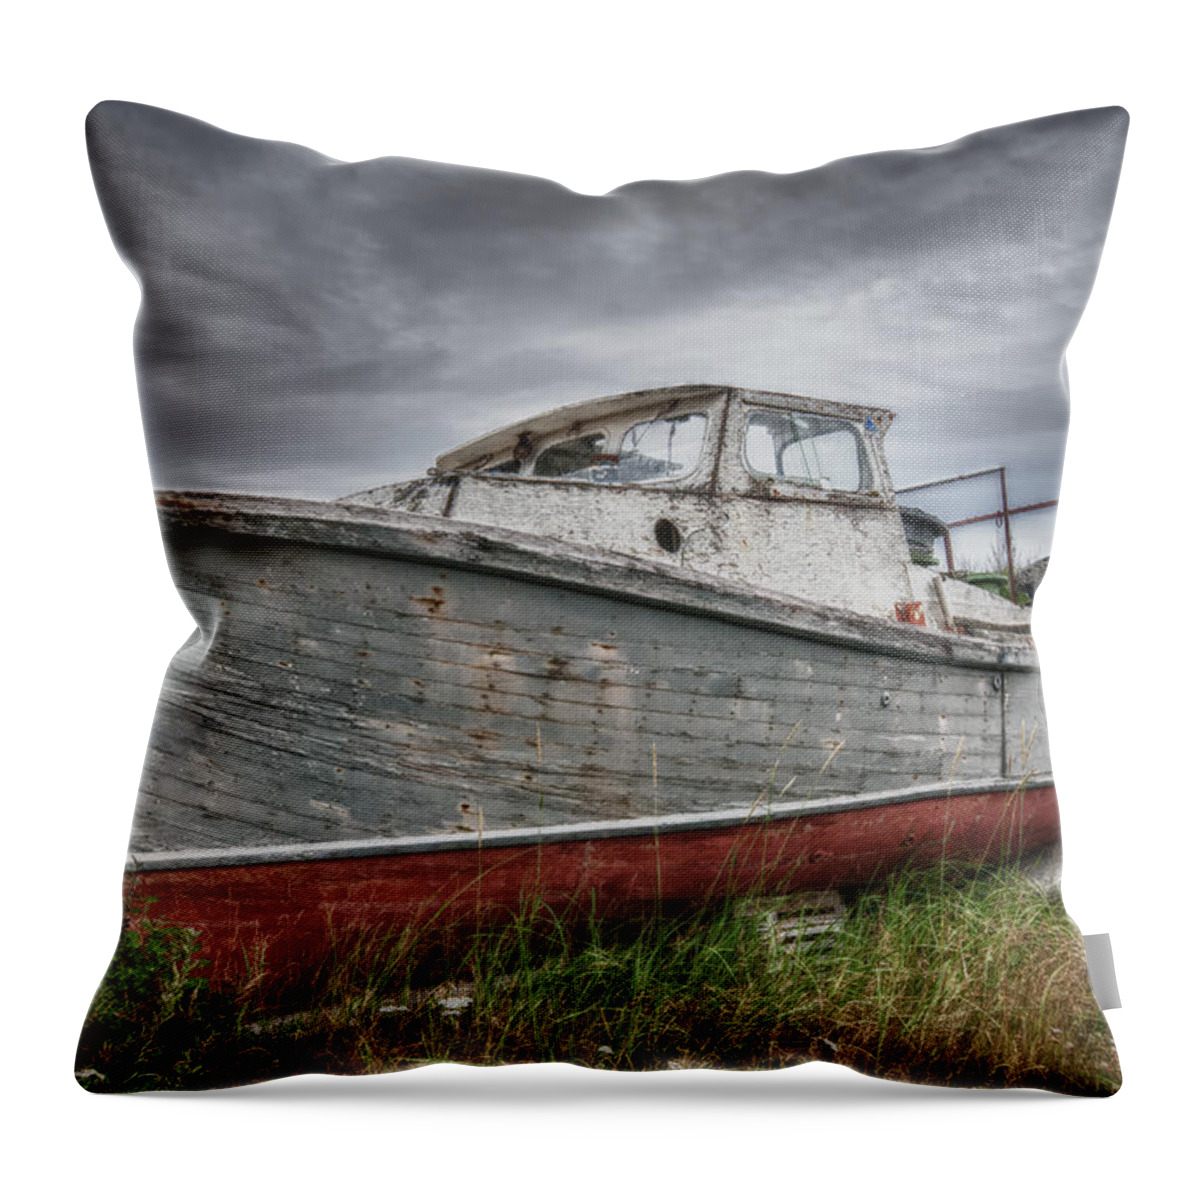 Boats Throw Pillow featuring the photograph The Lost Fleet Run Aground by Ghostwinds Photography